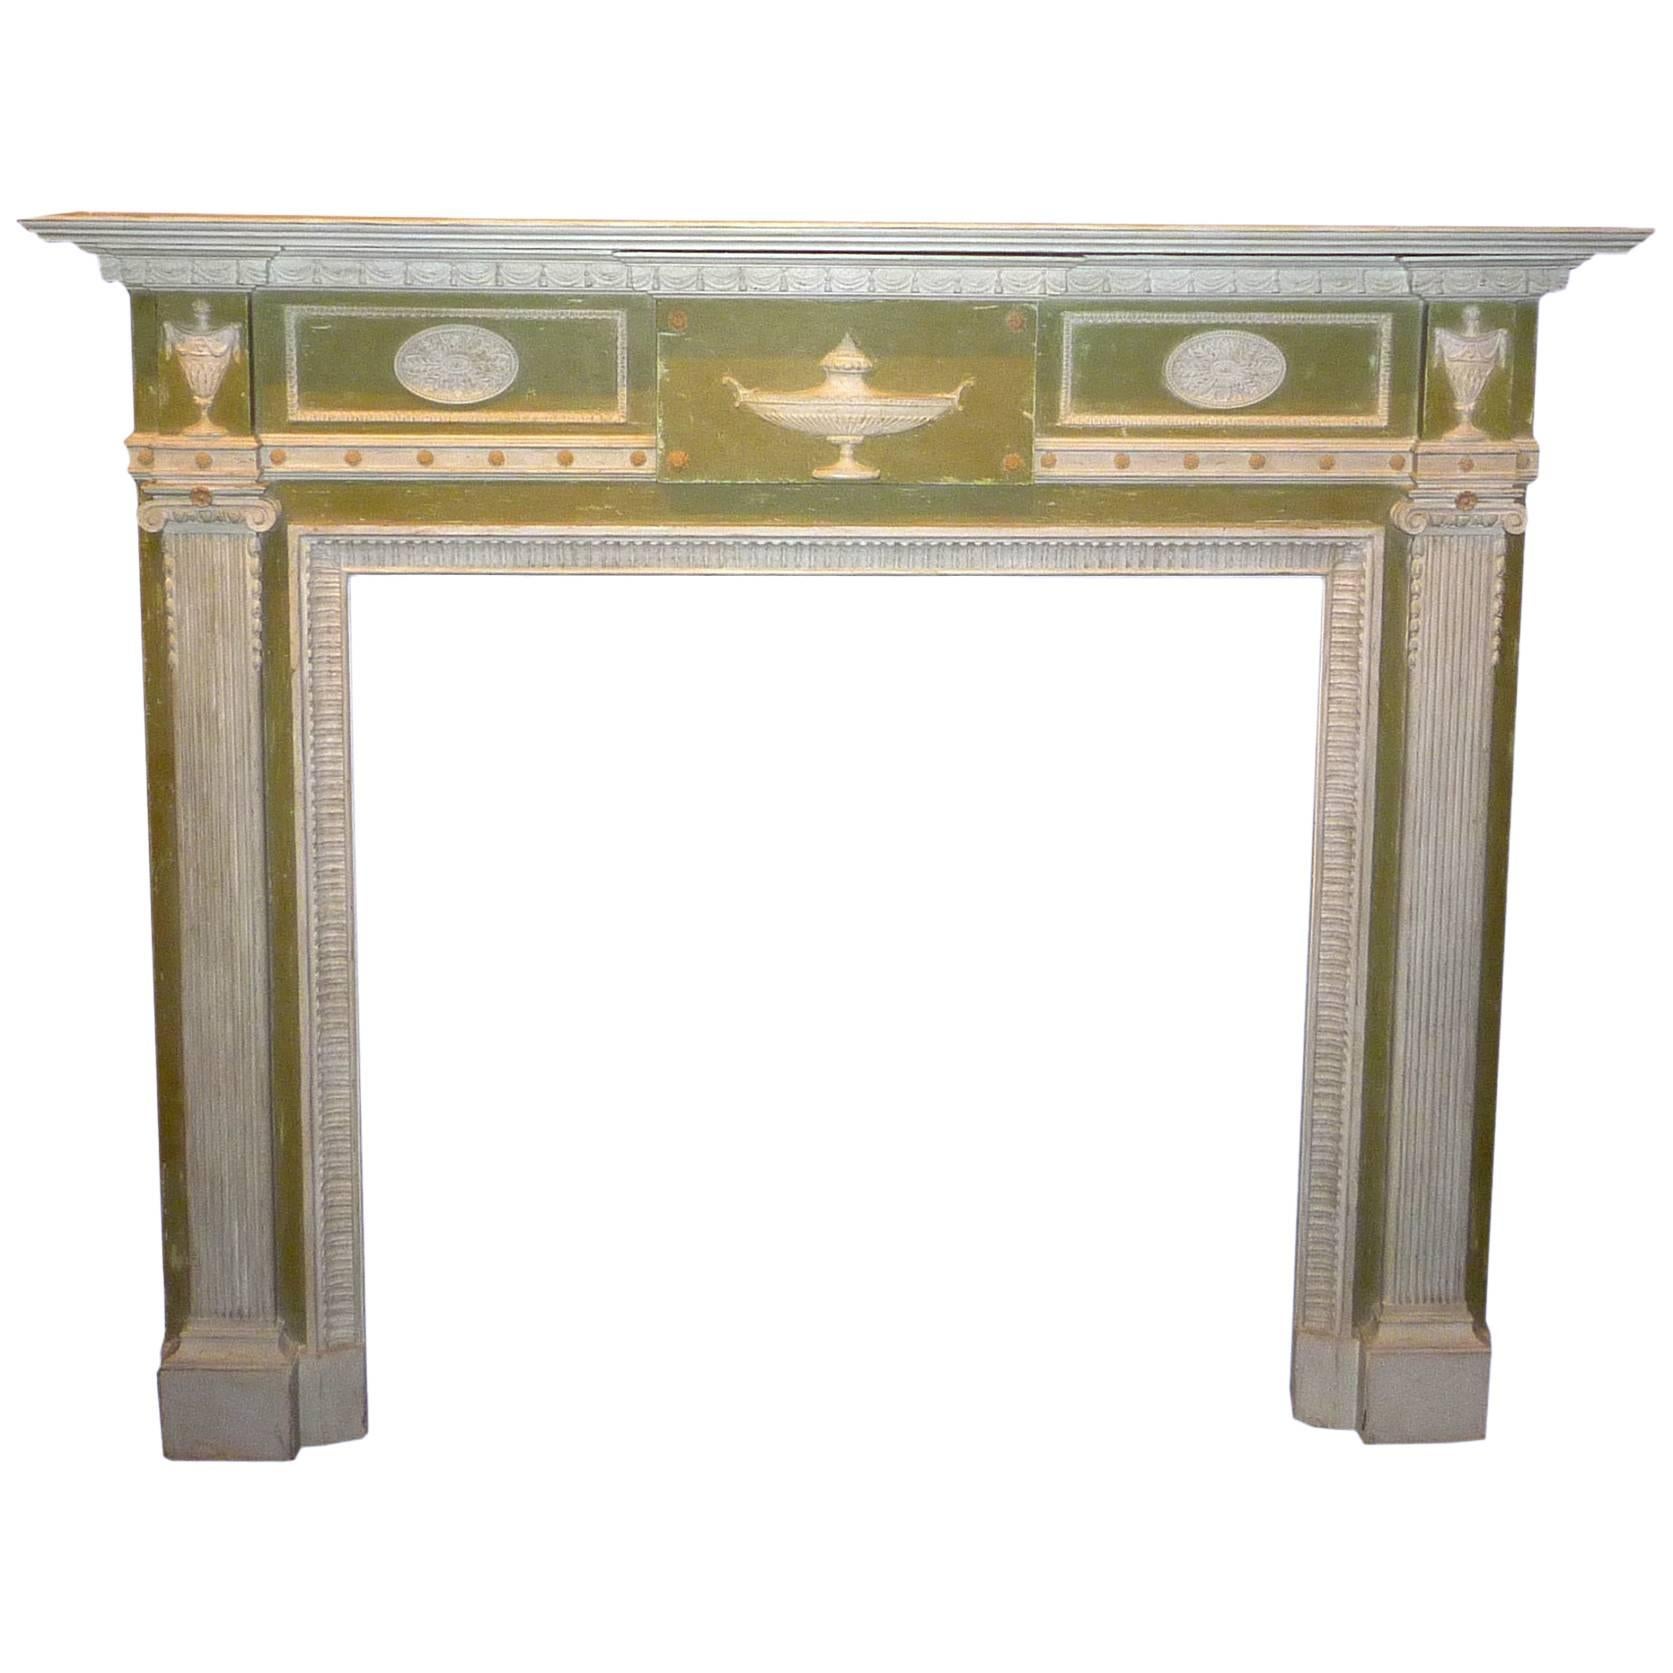 English Neoclassical Adam Style Carved and Painted Wood Fire Surround For Sale